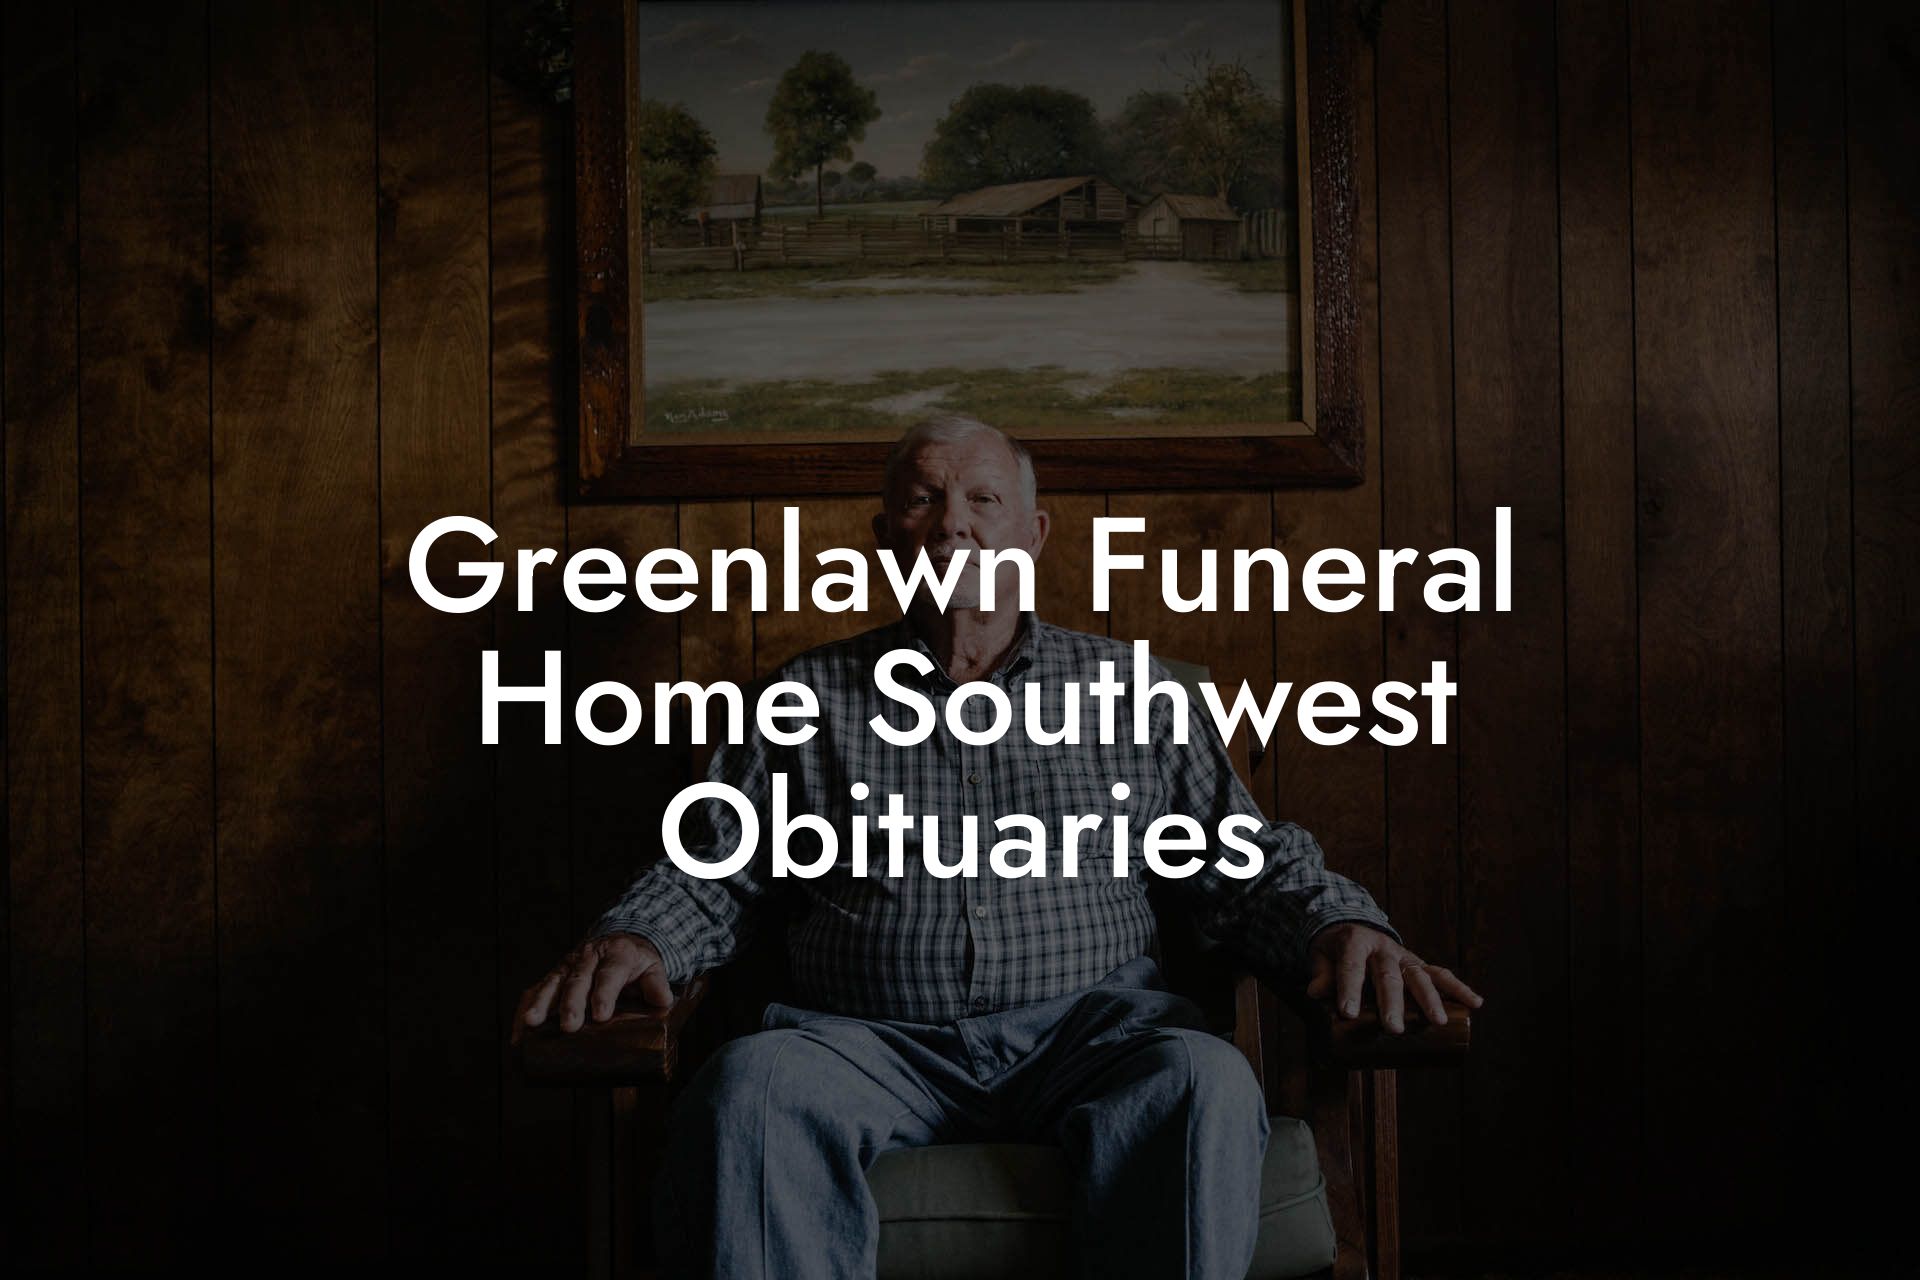 Greenlawn Funeral Home Southwest Obituaries